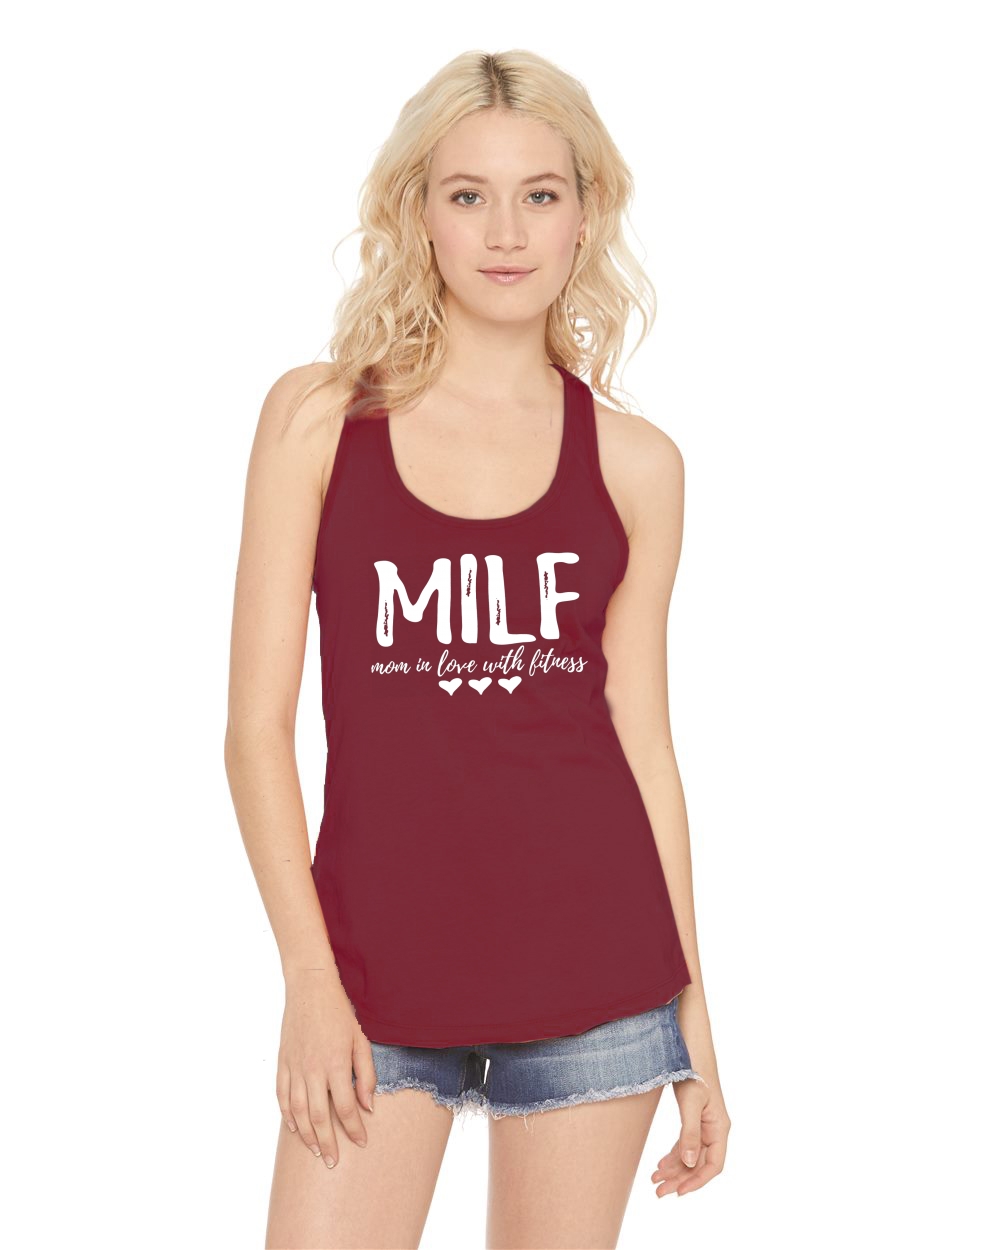 Ladies Milf Mom In Love With Fitness Racerback Wife Gym Workout Ebay 